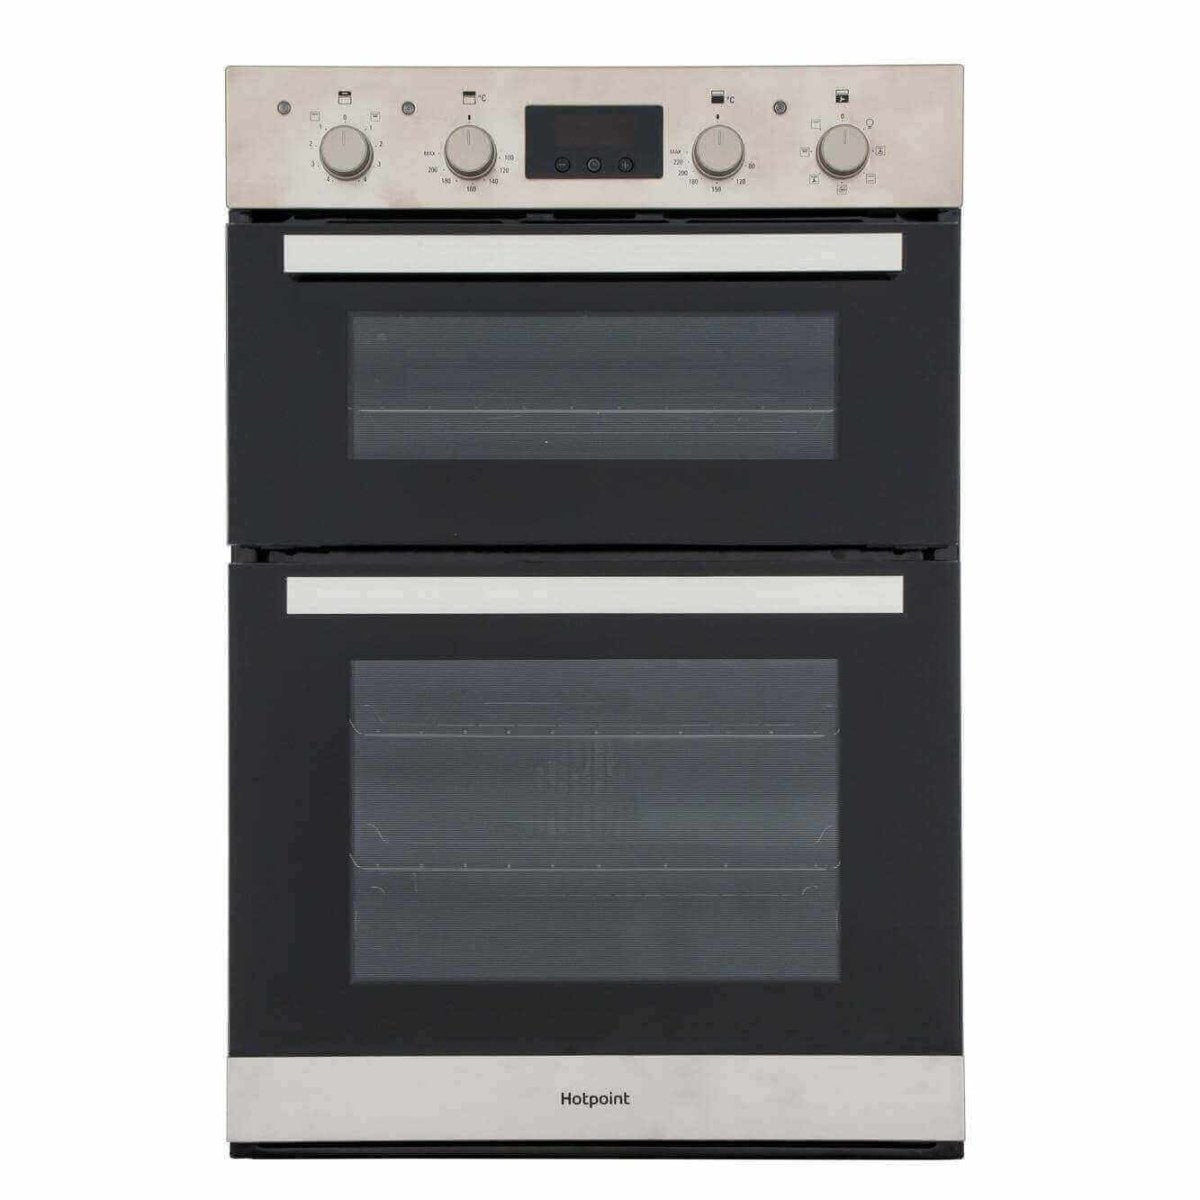 Hotpoint DKD3841IX Multifunction Electric Built In Double Oven - Stainless Steel - Atlantic Electrics